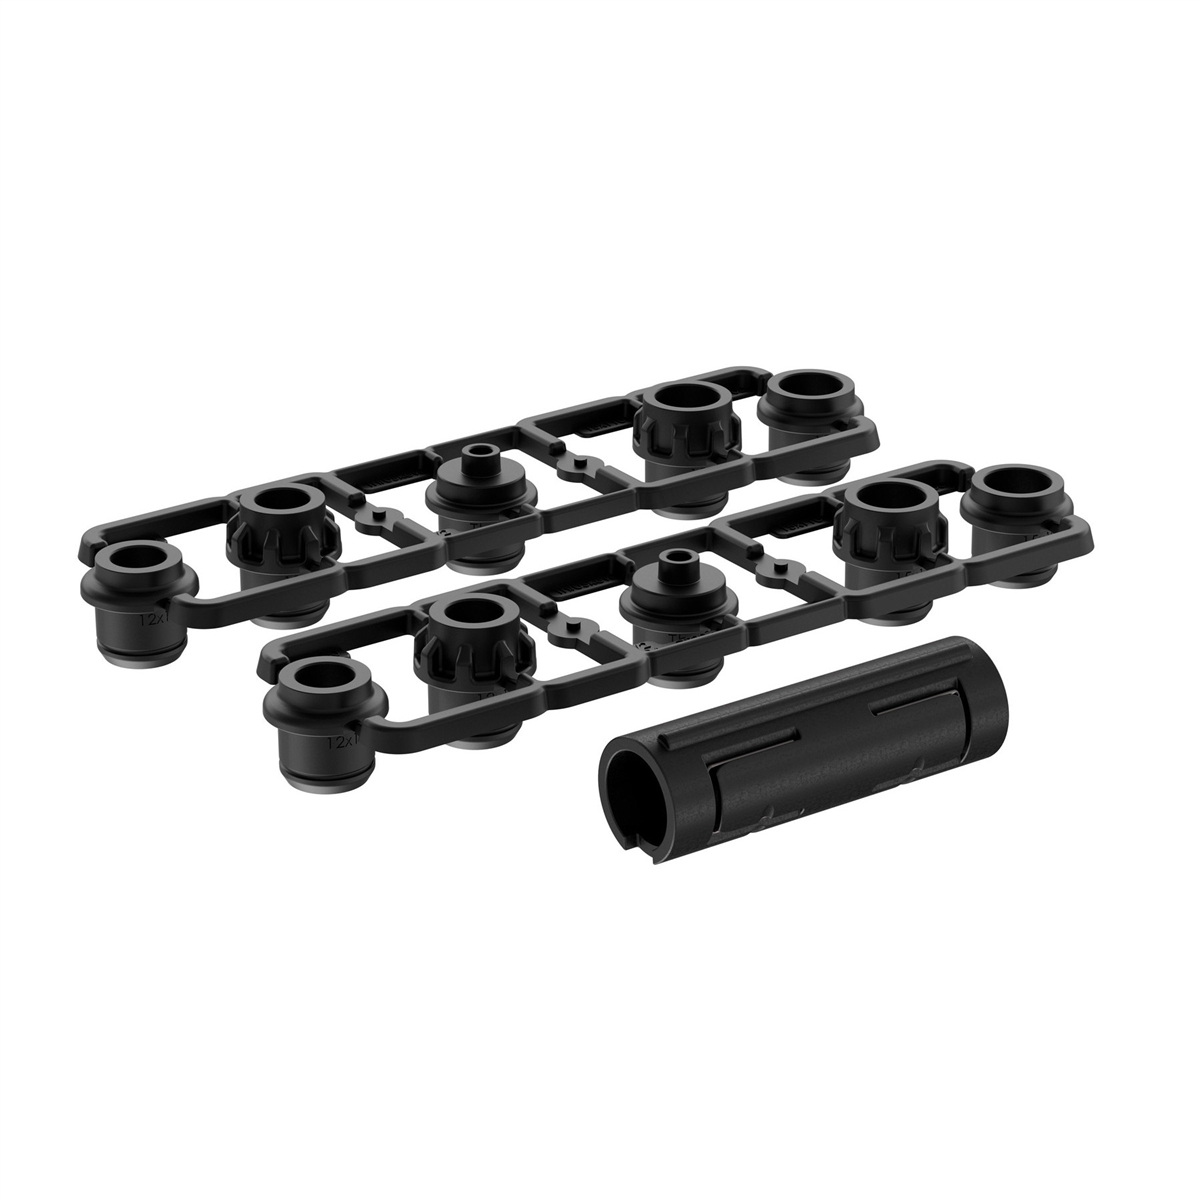 FastRide 9-15mm Axle Adapter Kit